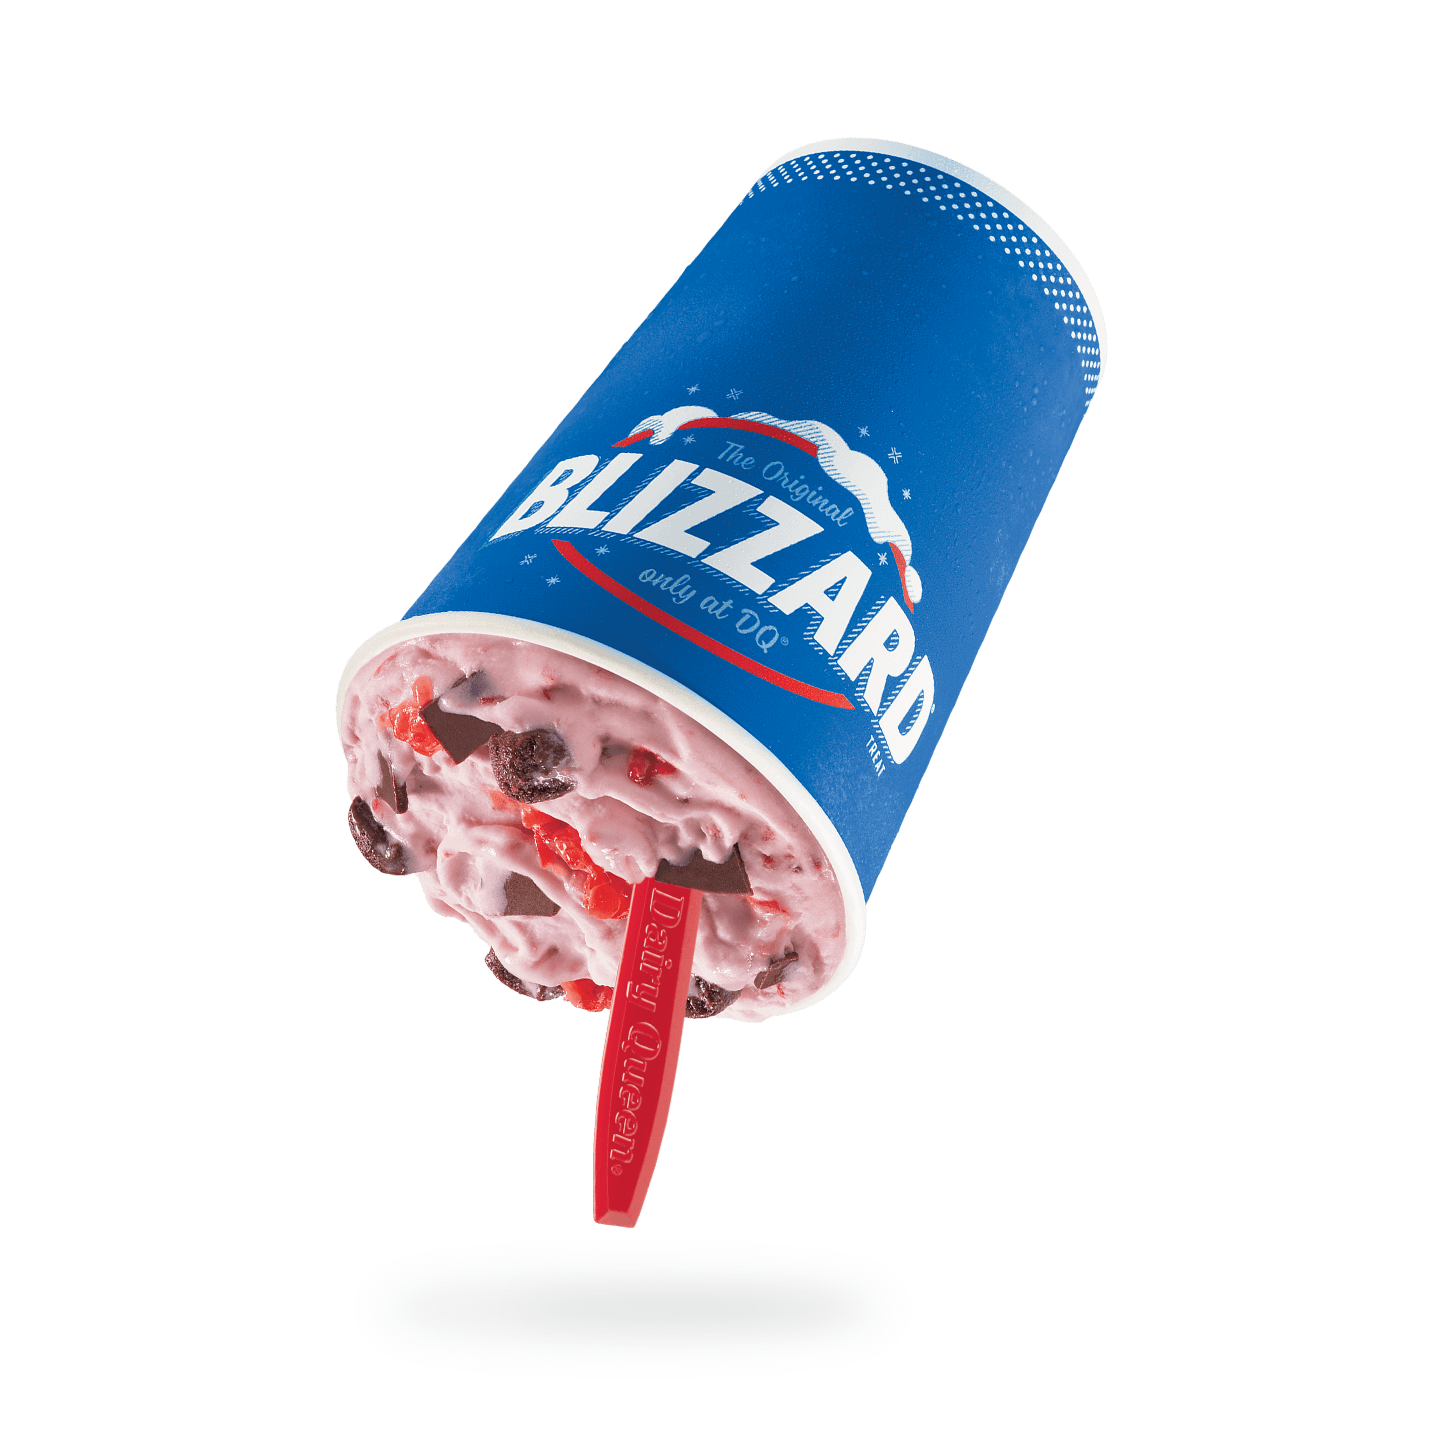 Dairy Queen Large Raspberry Fudge Bliss Blizzard Nutrition Facts